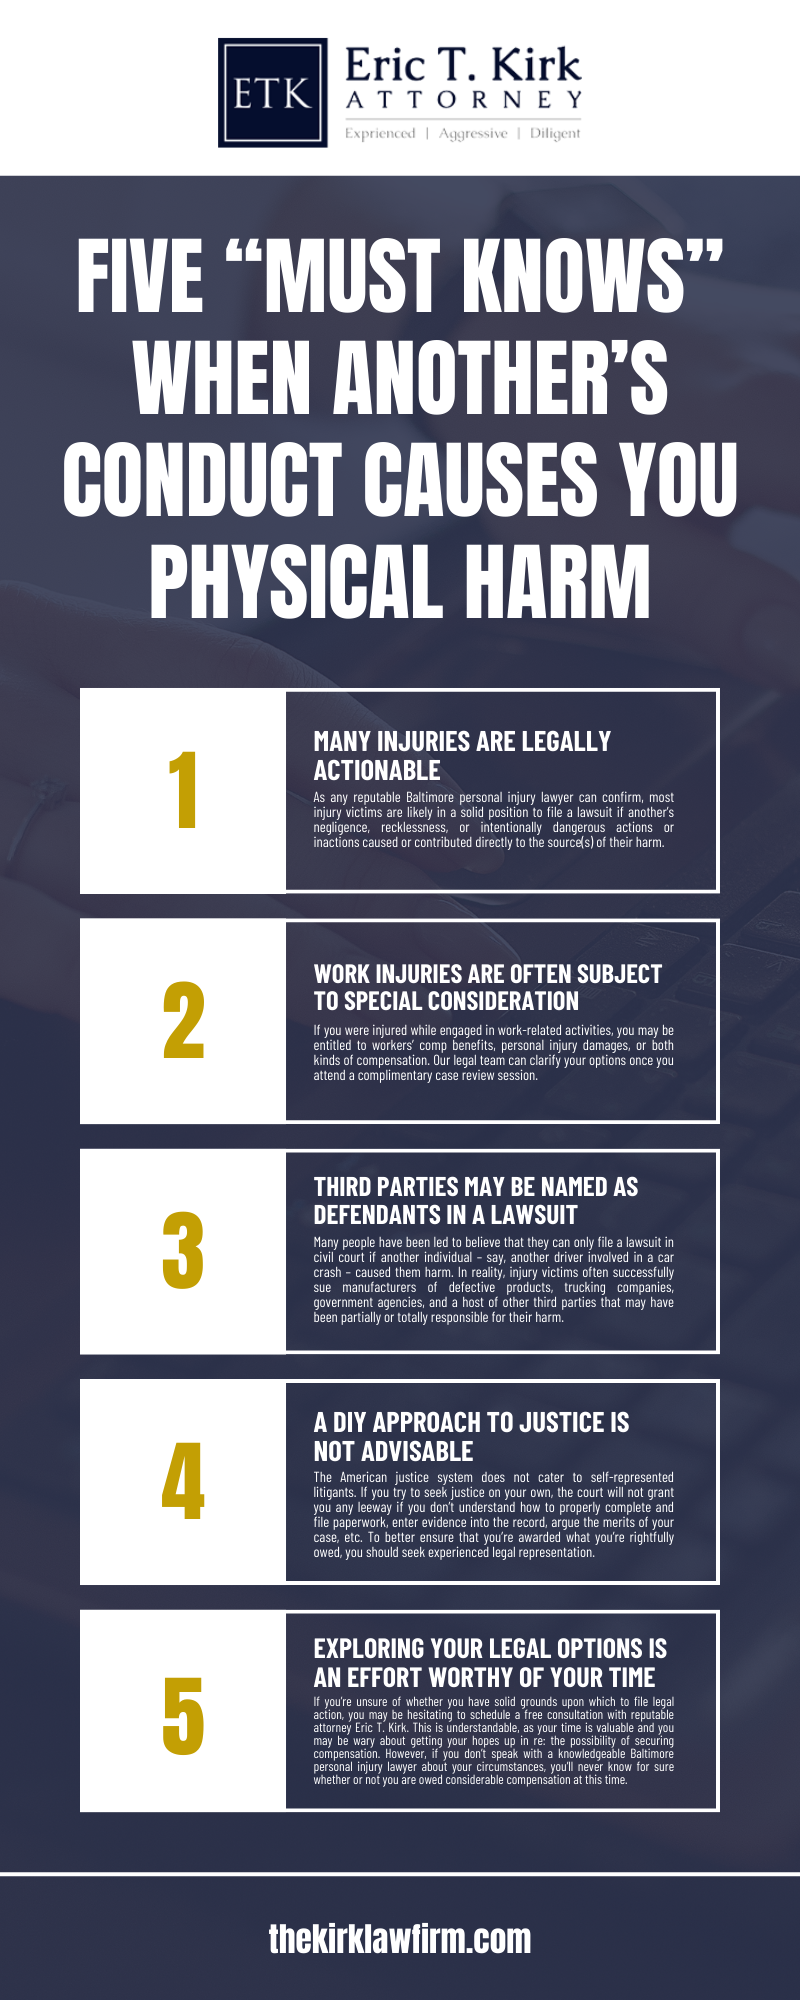 FIVE "MUST KNOWS" WHEN ANOTHER'S CONDUCT CAUSES YOU PHYSICAL HARM INFOGRAPHIC